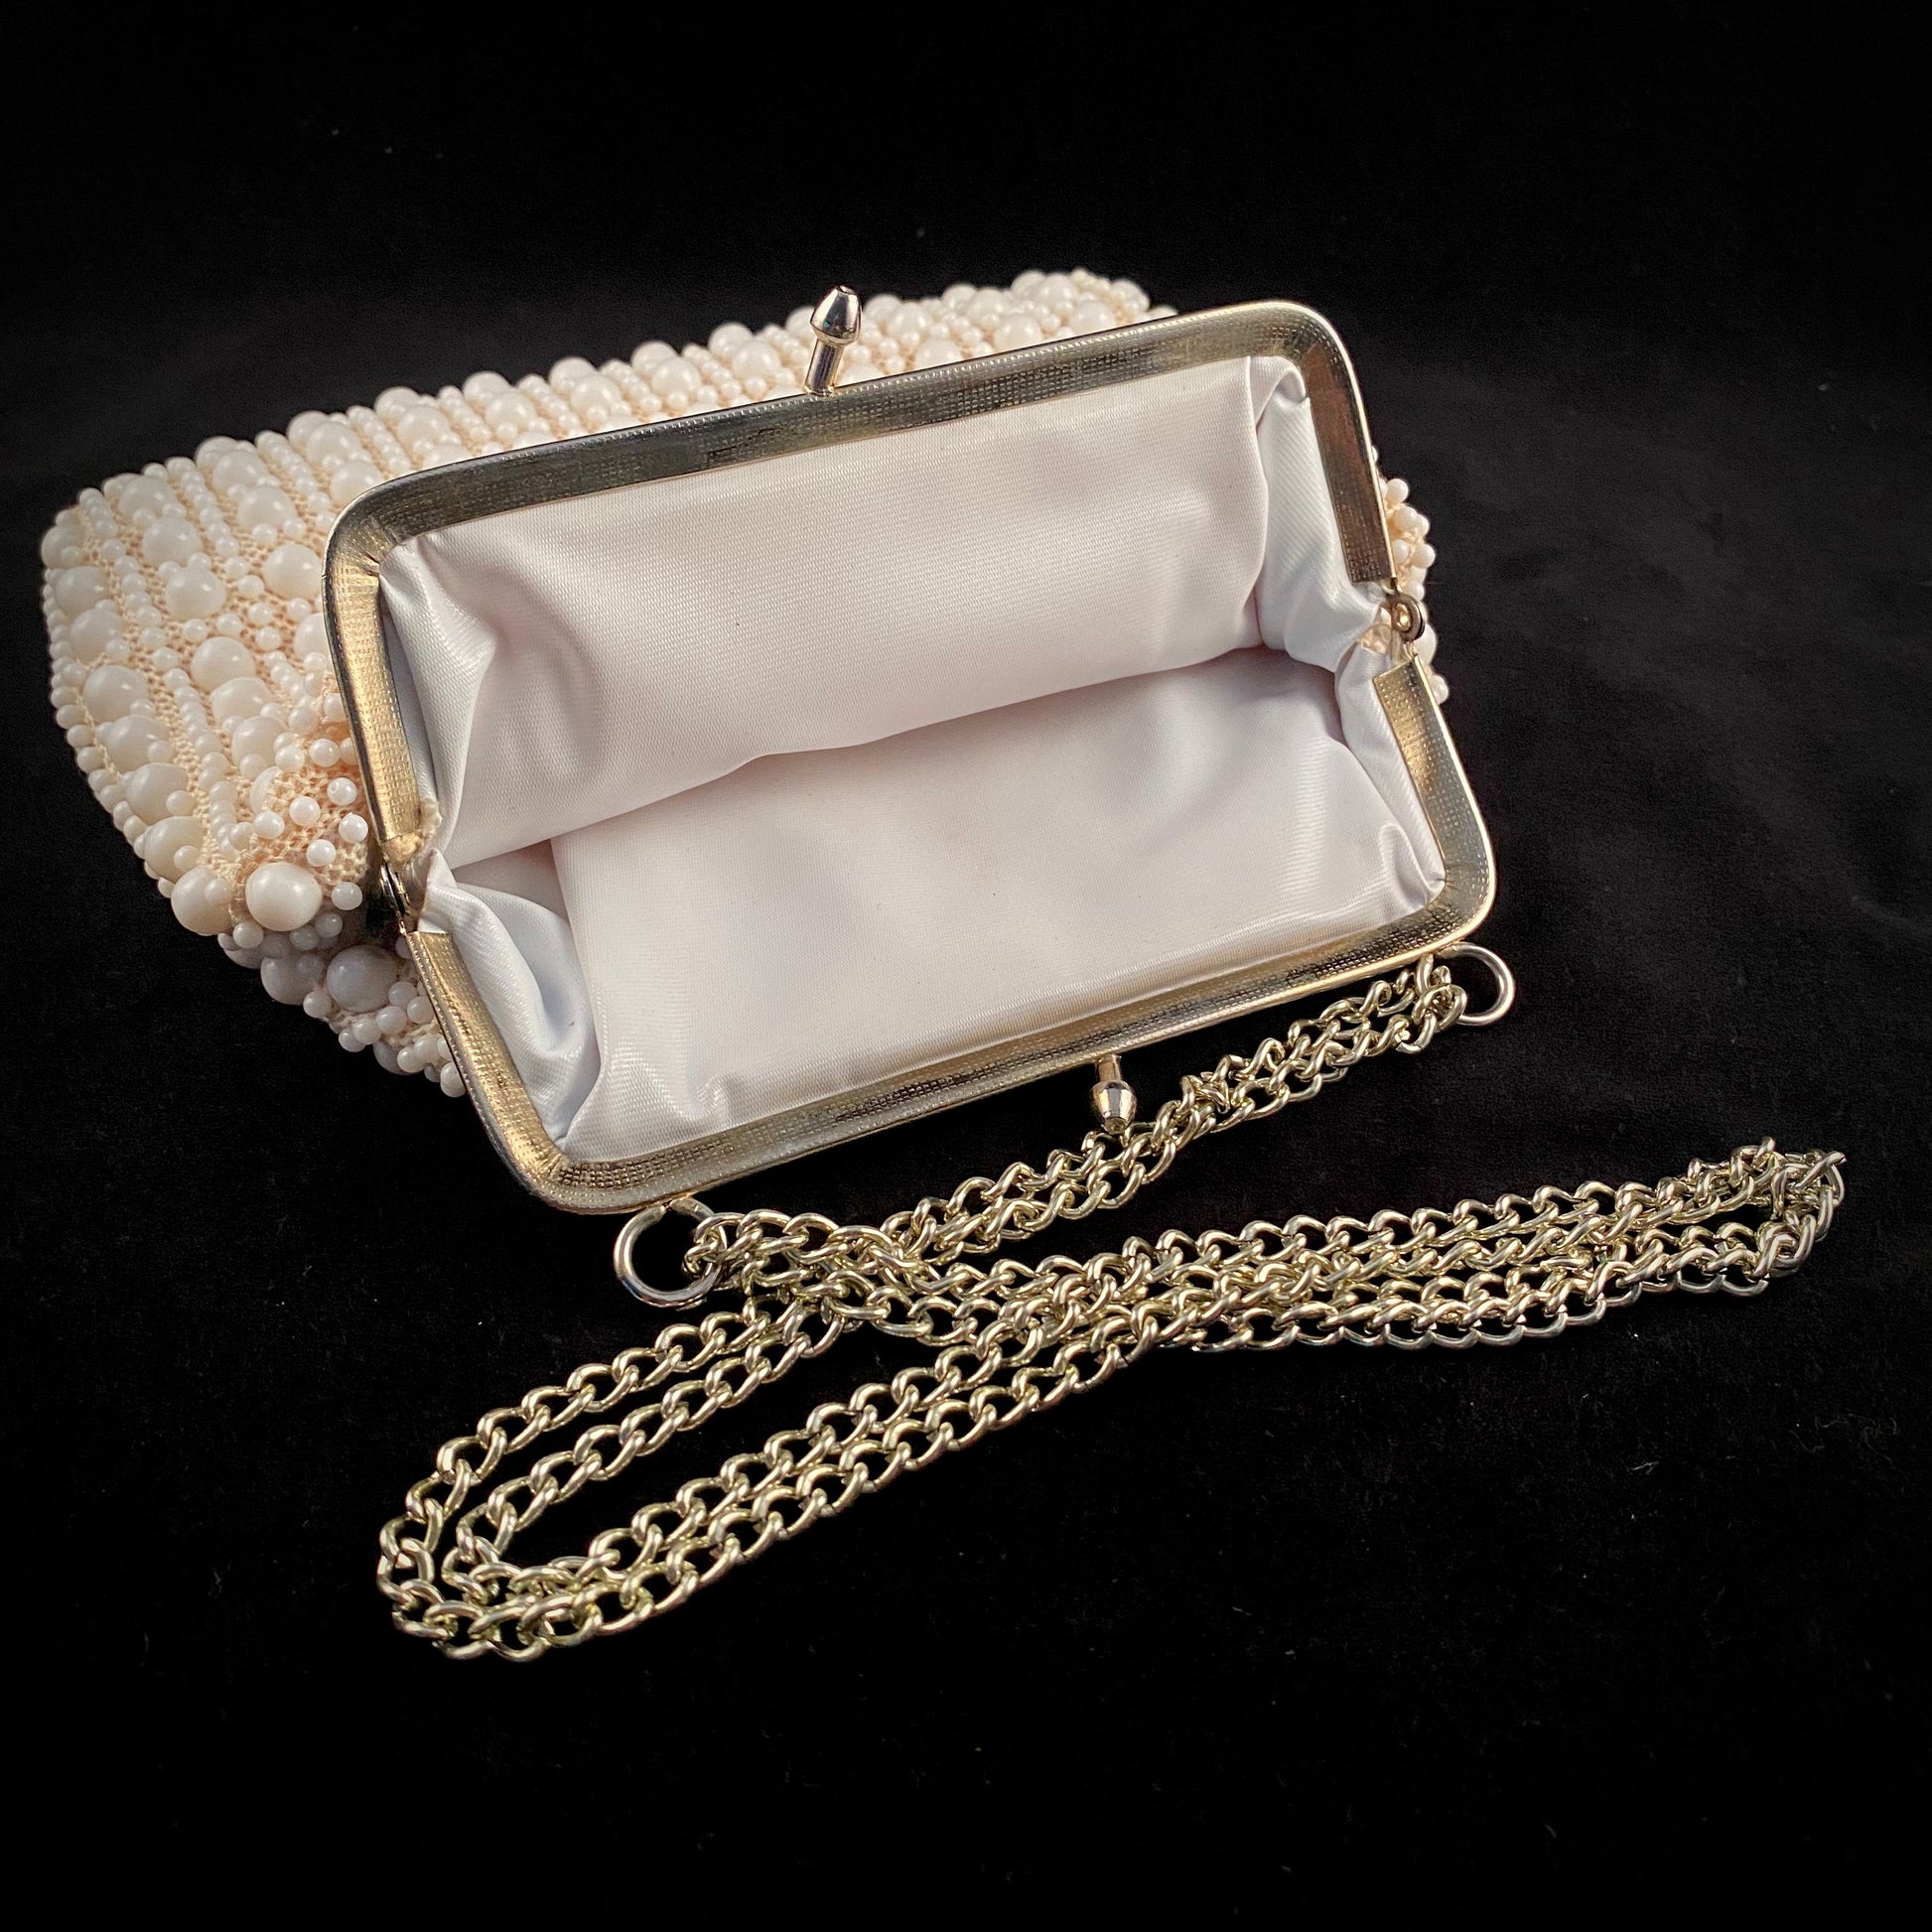 VINTAGE HAND MADE IN HONG KONG WHITE BEADED PURSE CLUTCH HANDBAG MOTHER OF  PEARL